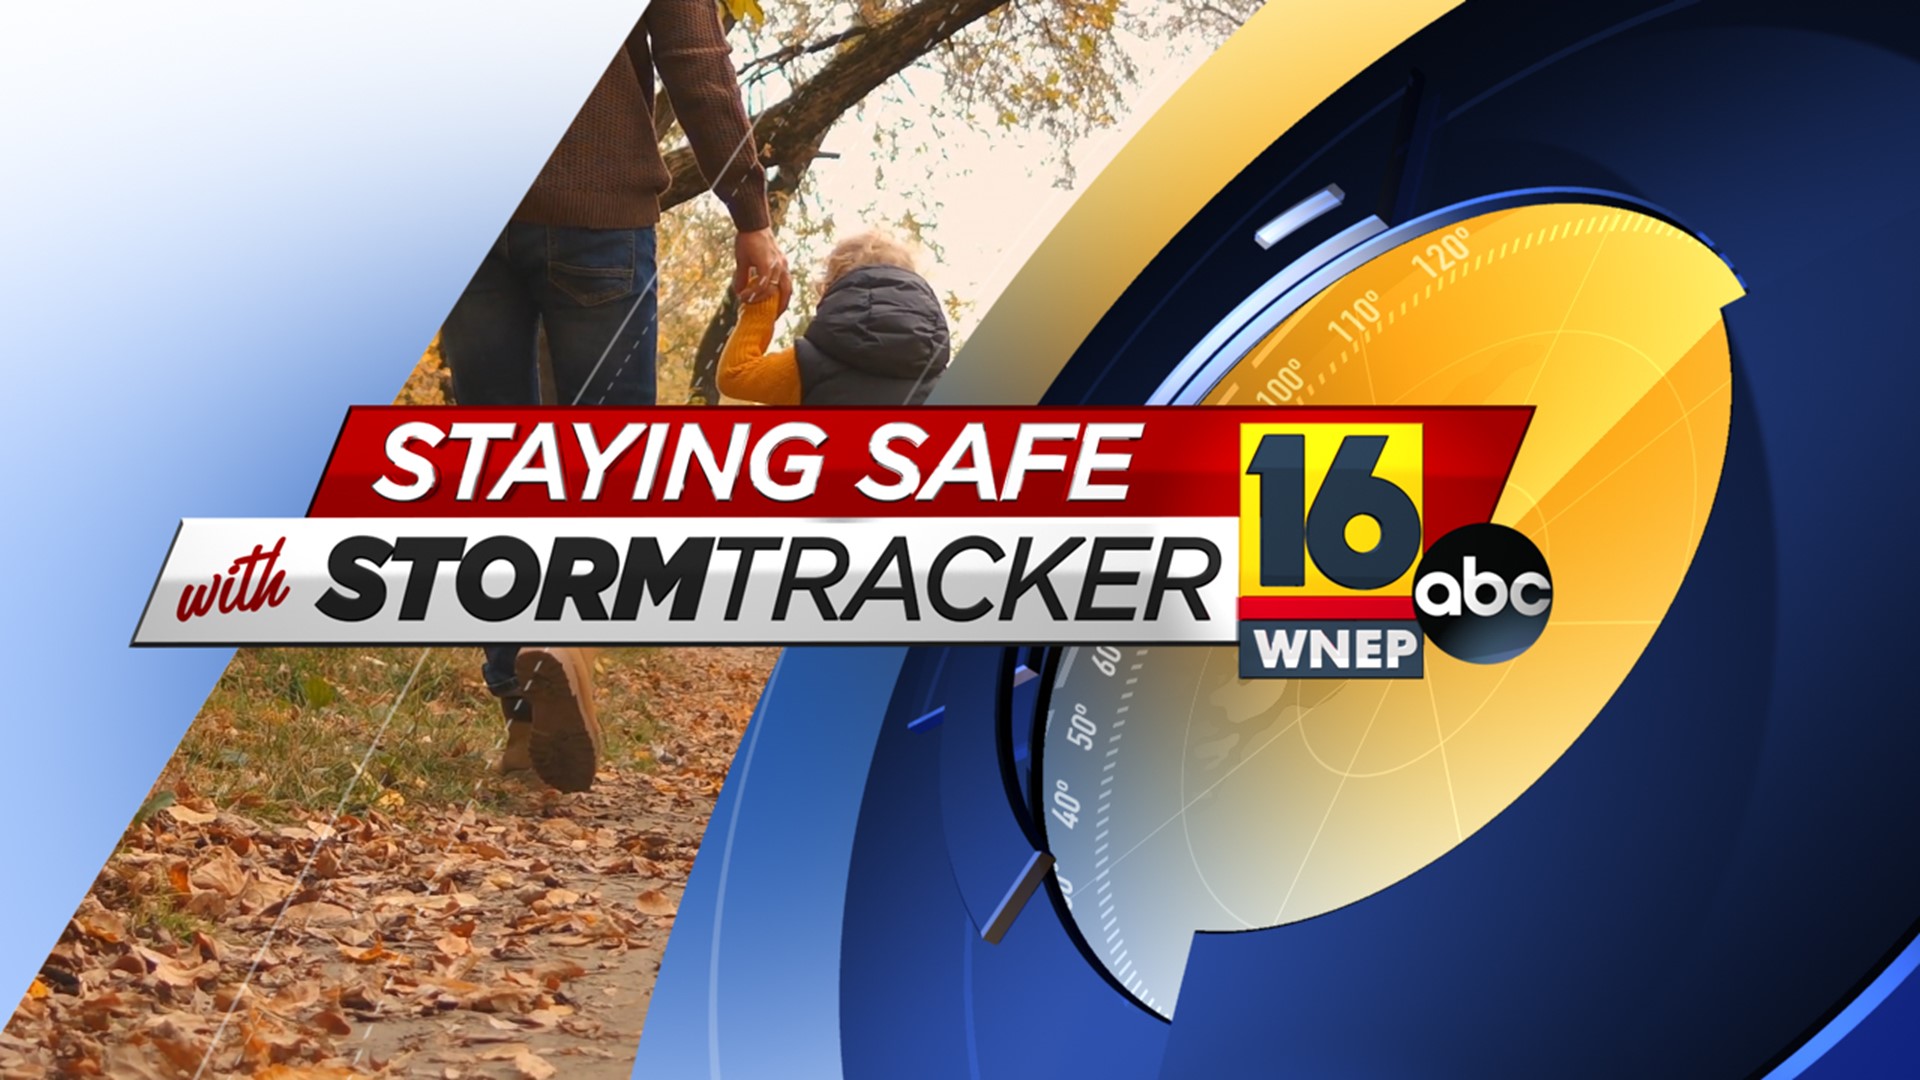 The Stormtracker 16 Teams keeps you safe this winter season!